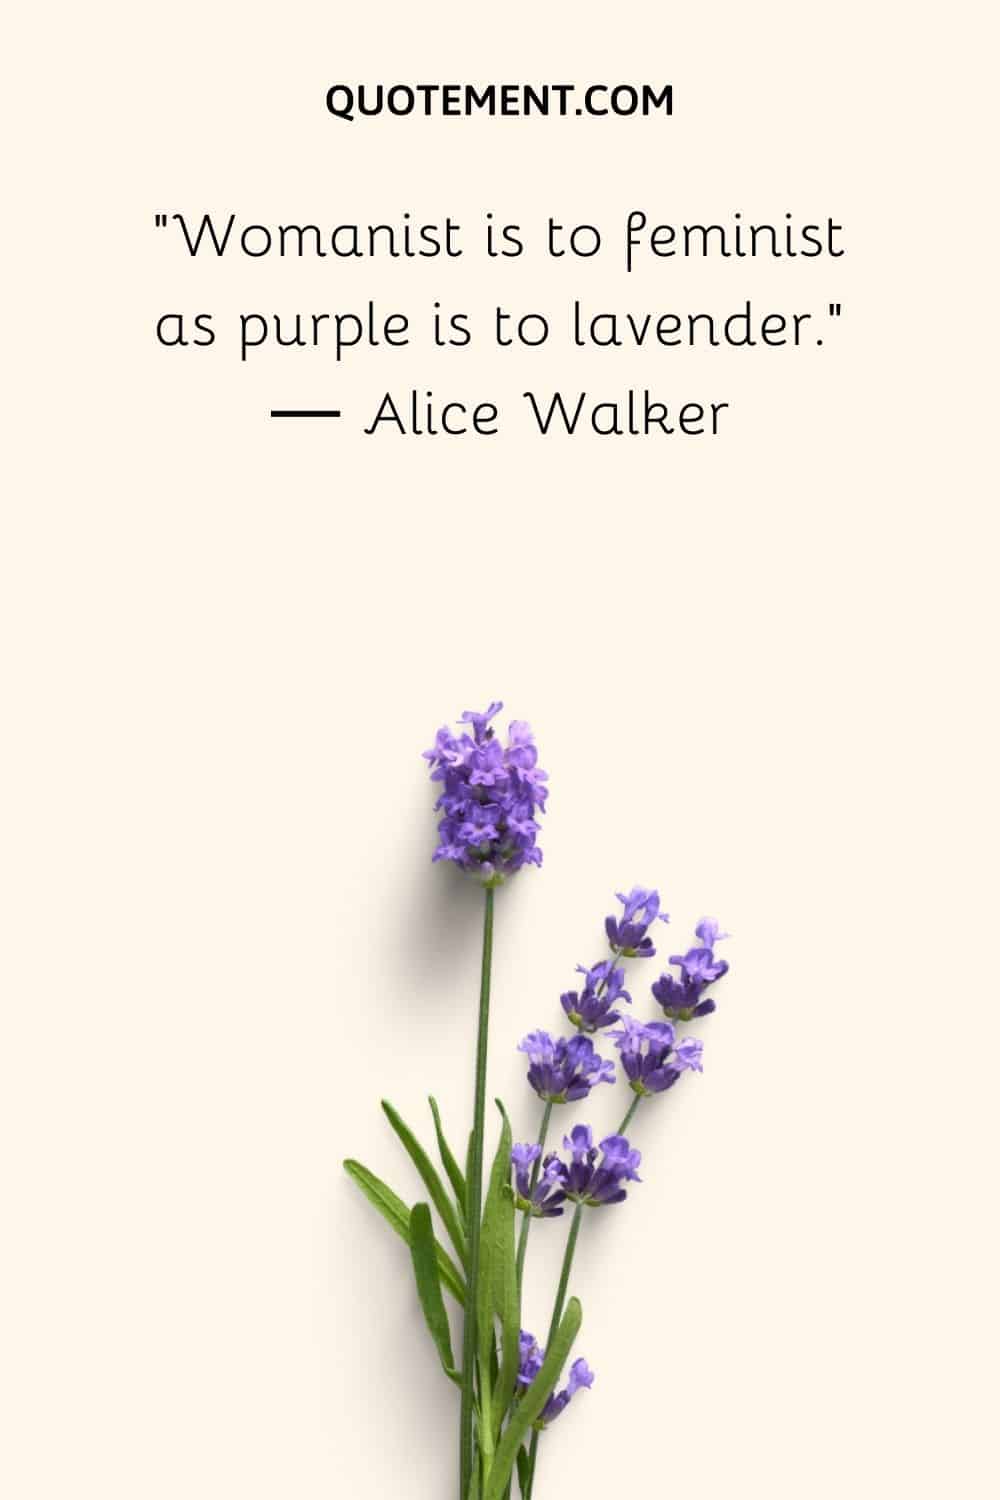 Womanist is to feminist as purple is to lavender